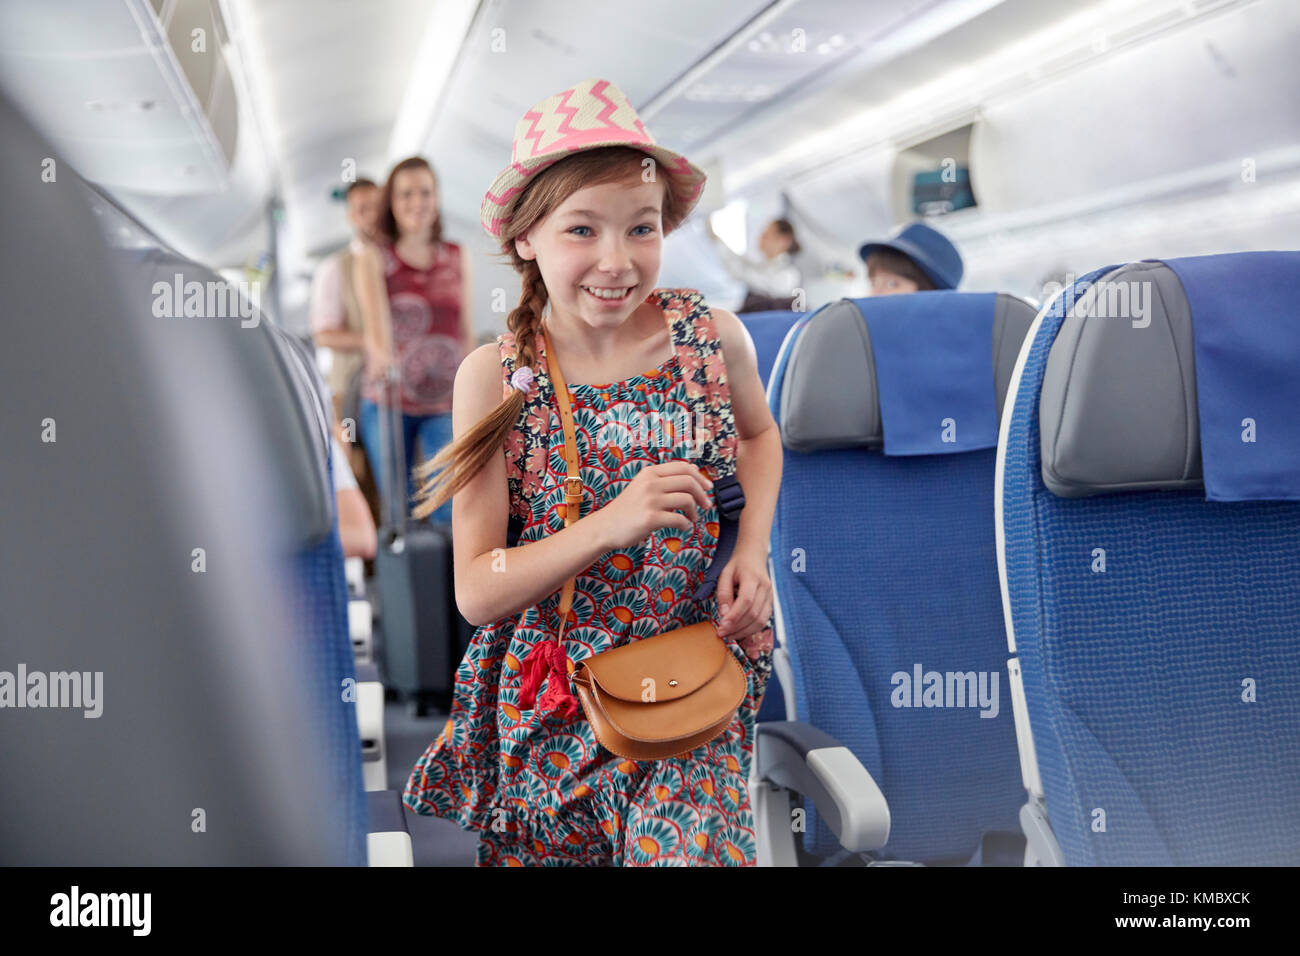 Smiling,eager girl boarding airplane Stock Photo